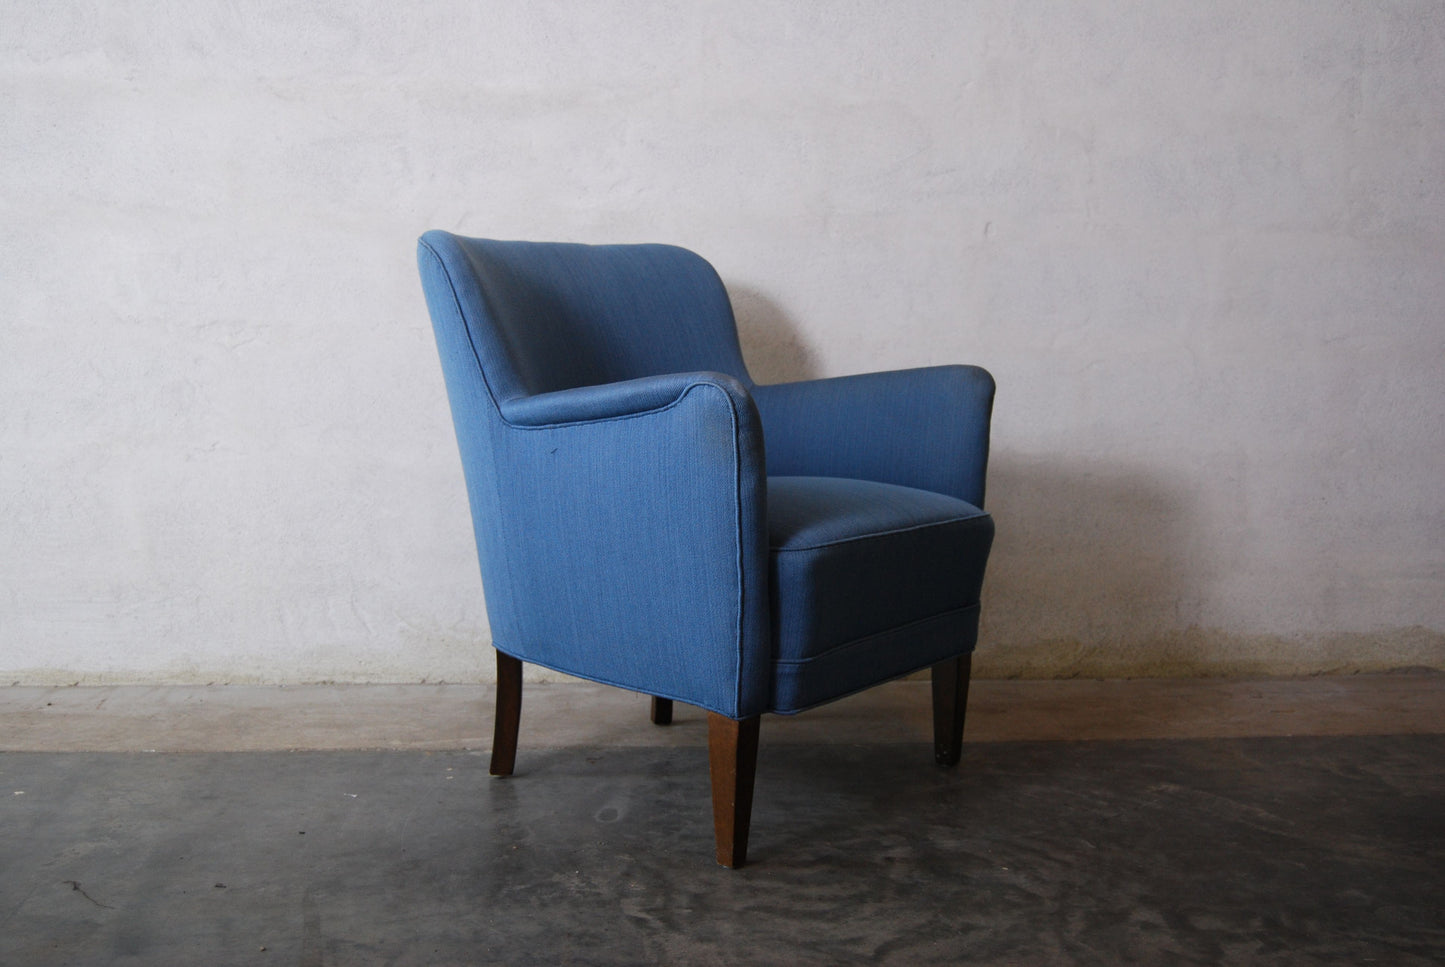 Lowback lounge chair in style of Malmsten